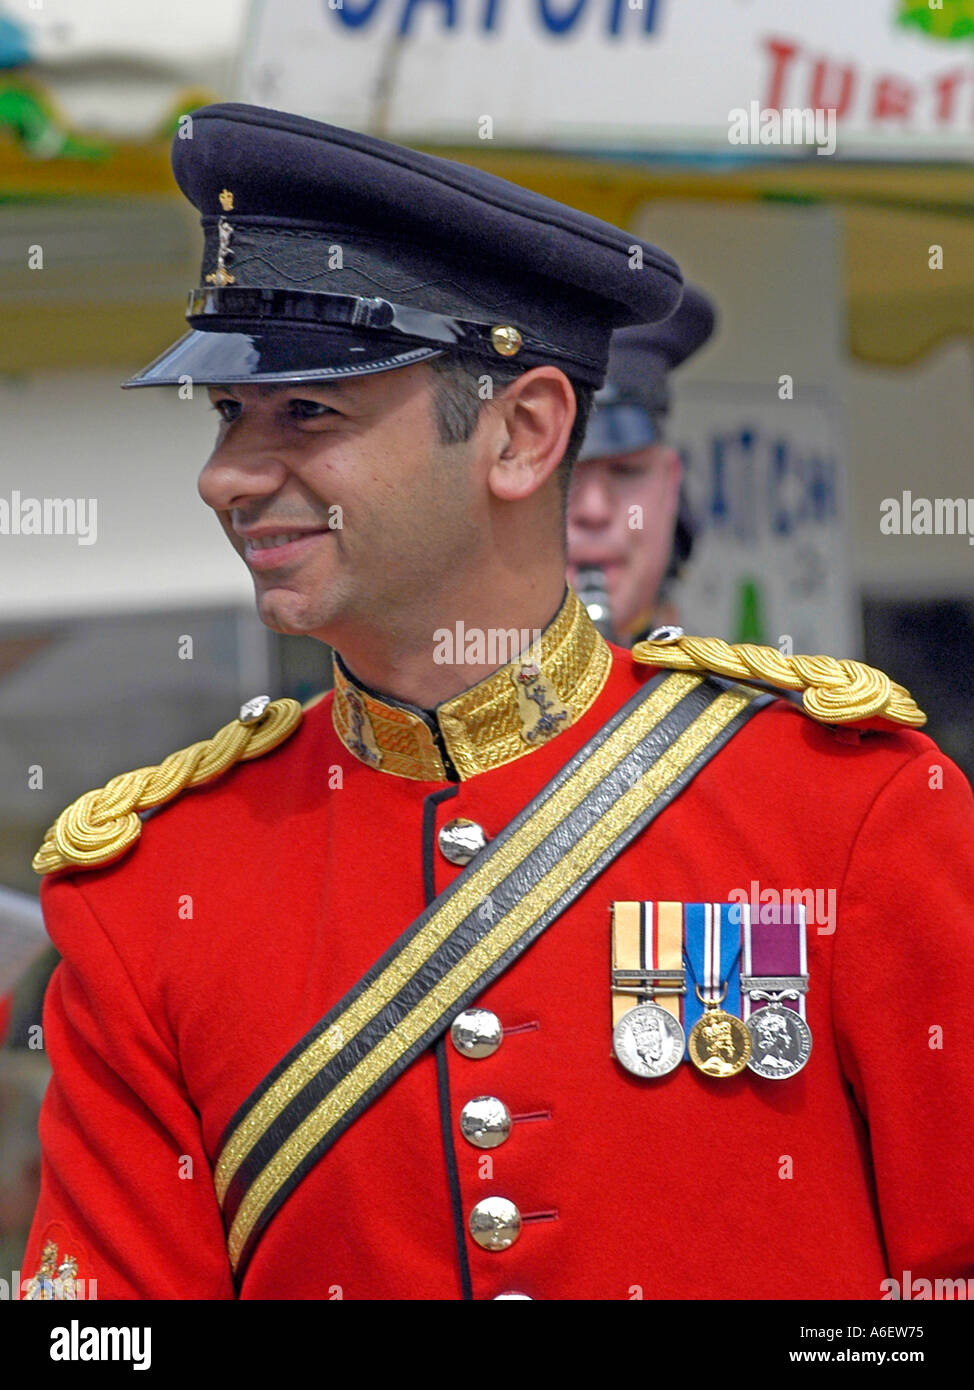 British Army Officer wearing a red tunic and medals at a cerimonial fuction in London Stock Photo